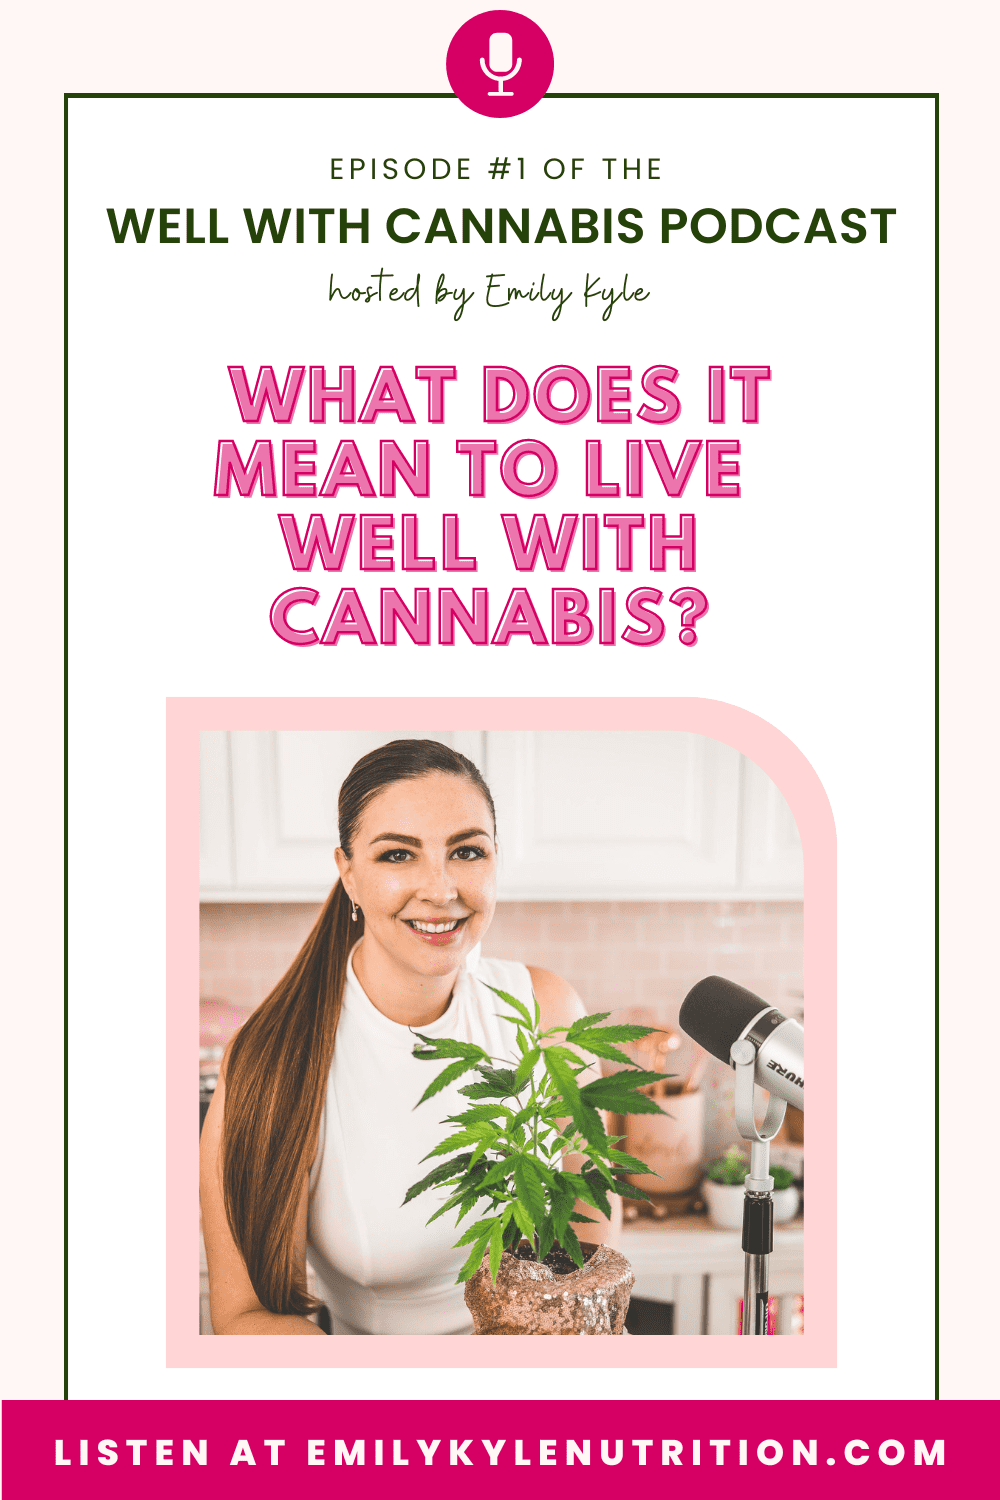 A picture of Emily Kyle with text that says what does it mean to live well with cannabis?